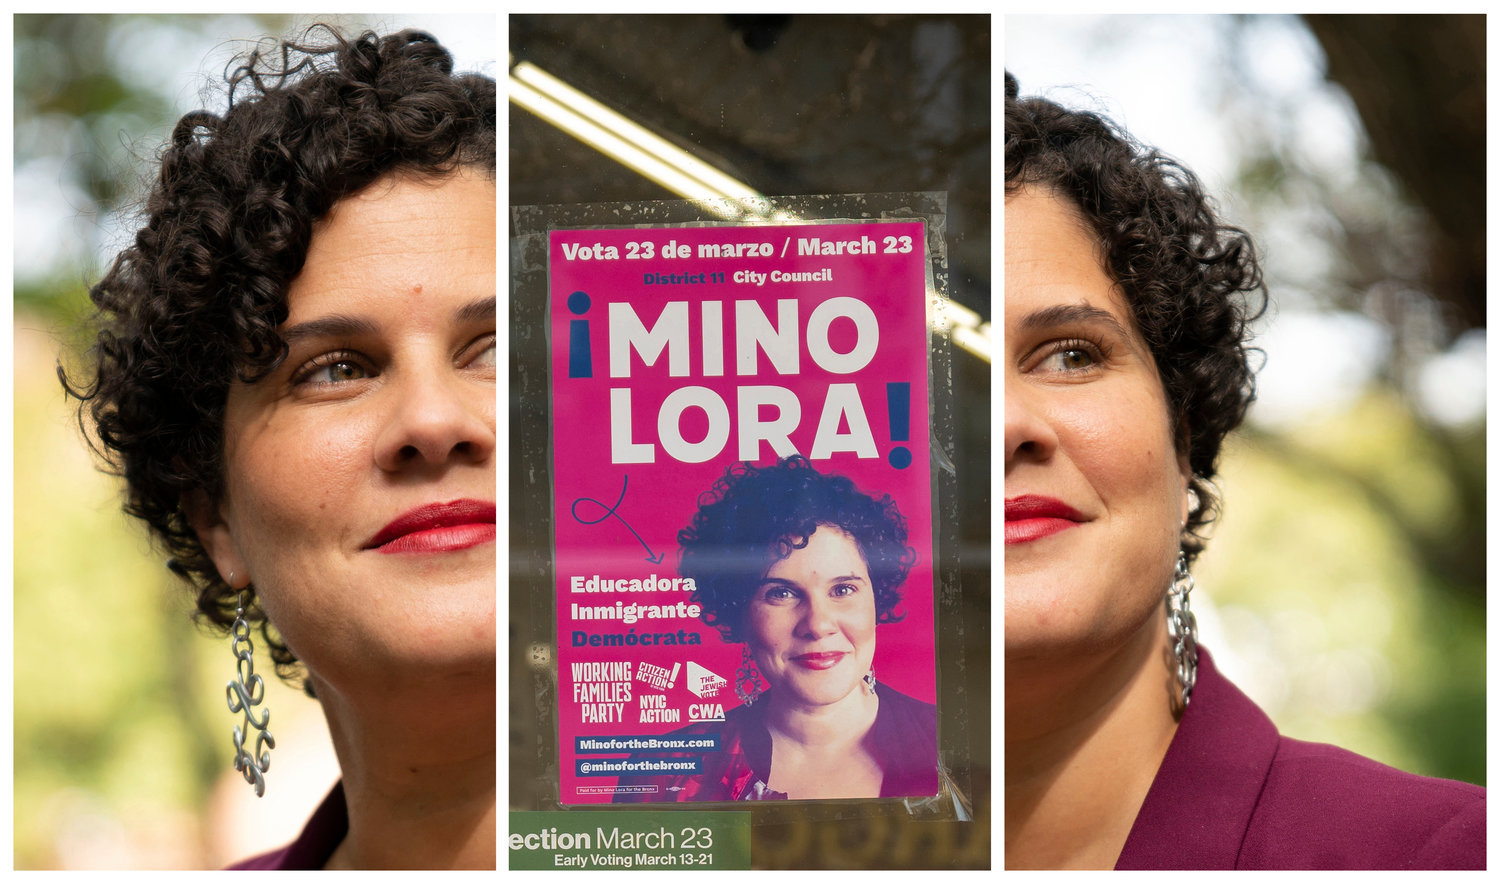 Mino Lora, an arts non-profit executive, says she’s making the rounds to three of the council district’s neighborhoods each day to talk to about her campaign. Just a few days from now, Lora and five competitors will find out which of them will replace Andrew Cohen on the city council in the March 23 special election.